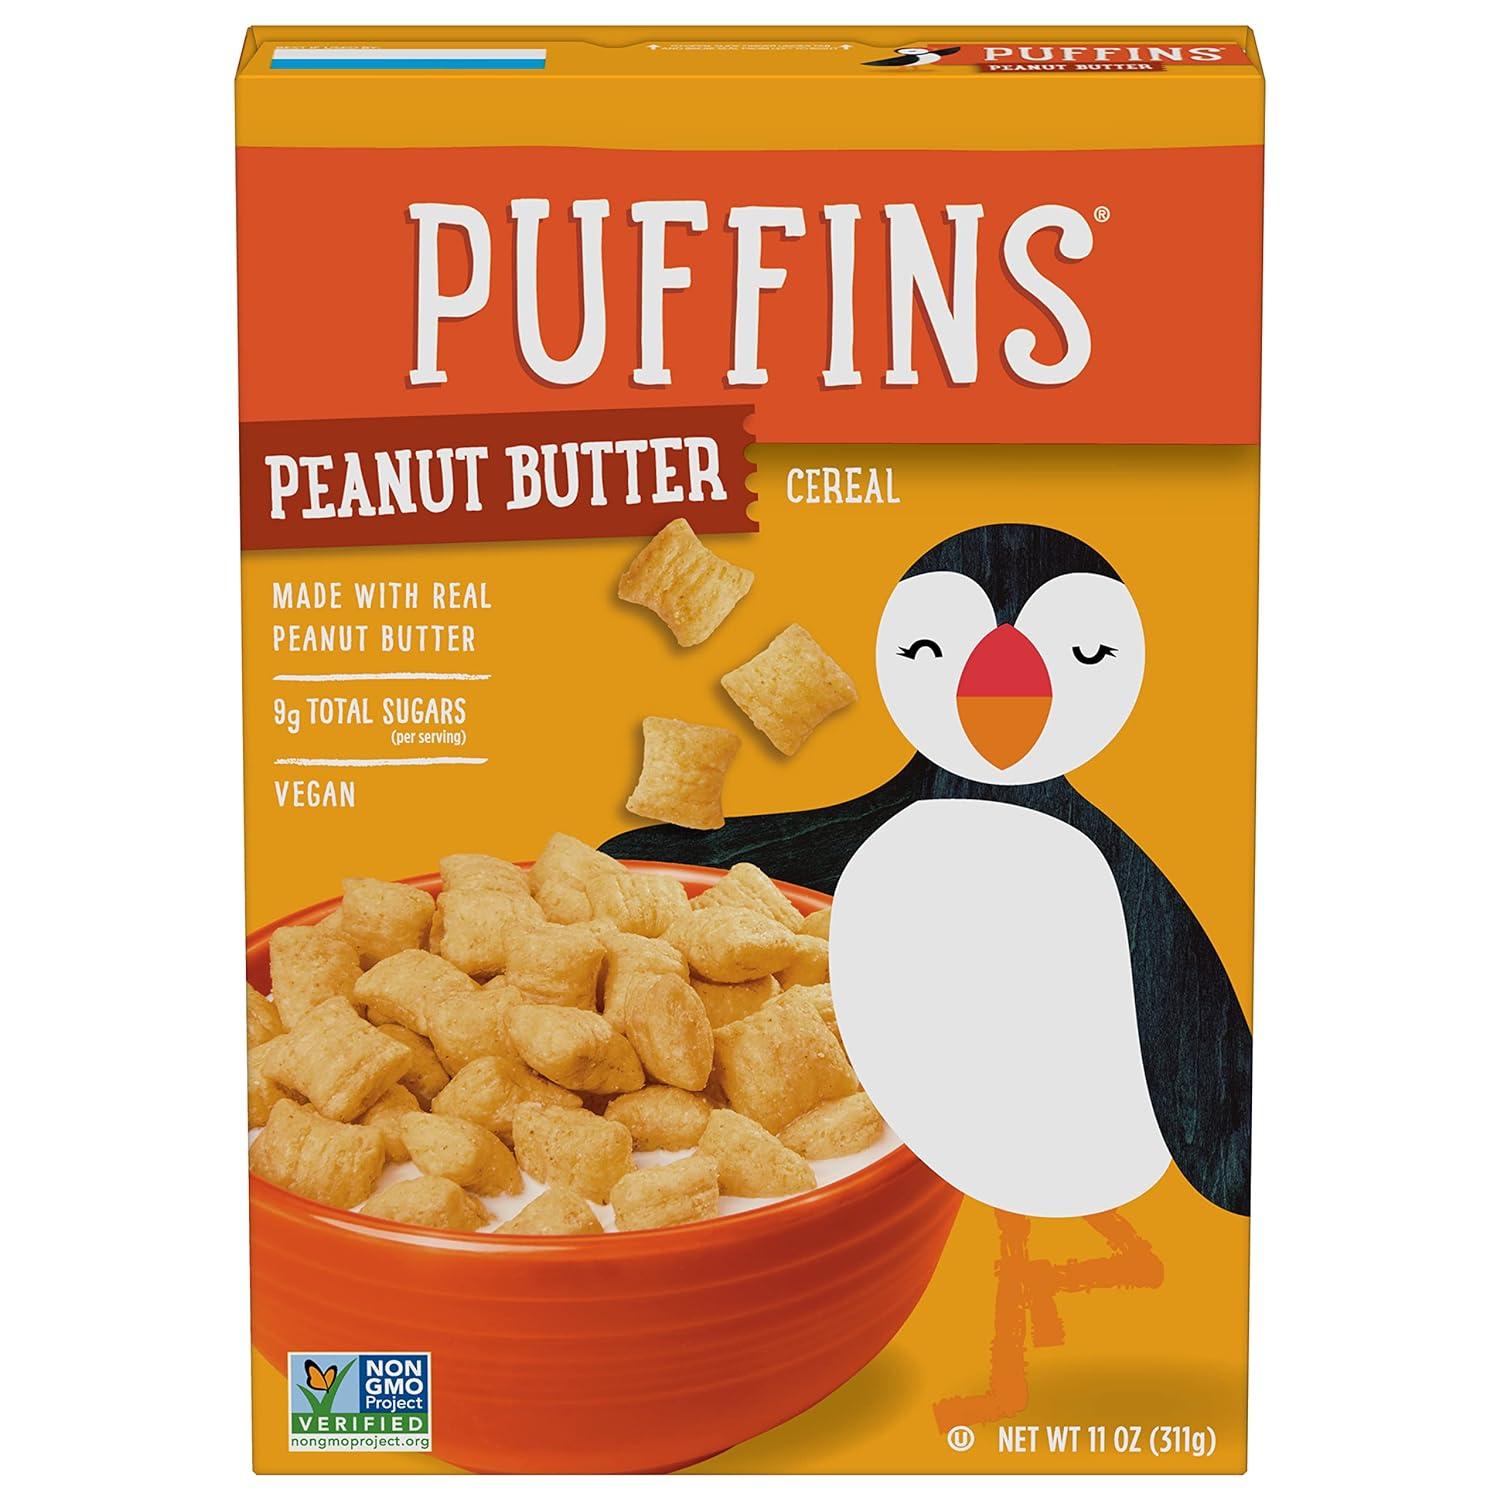 Barbaras Peanut Butter Puffins Cereal for $2.79